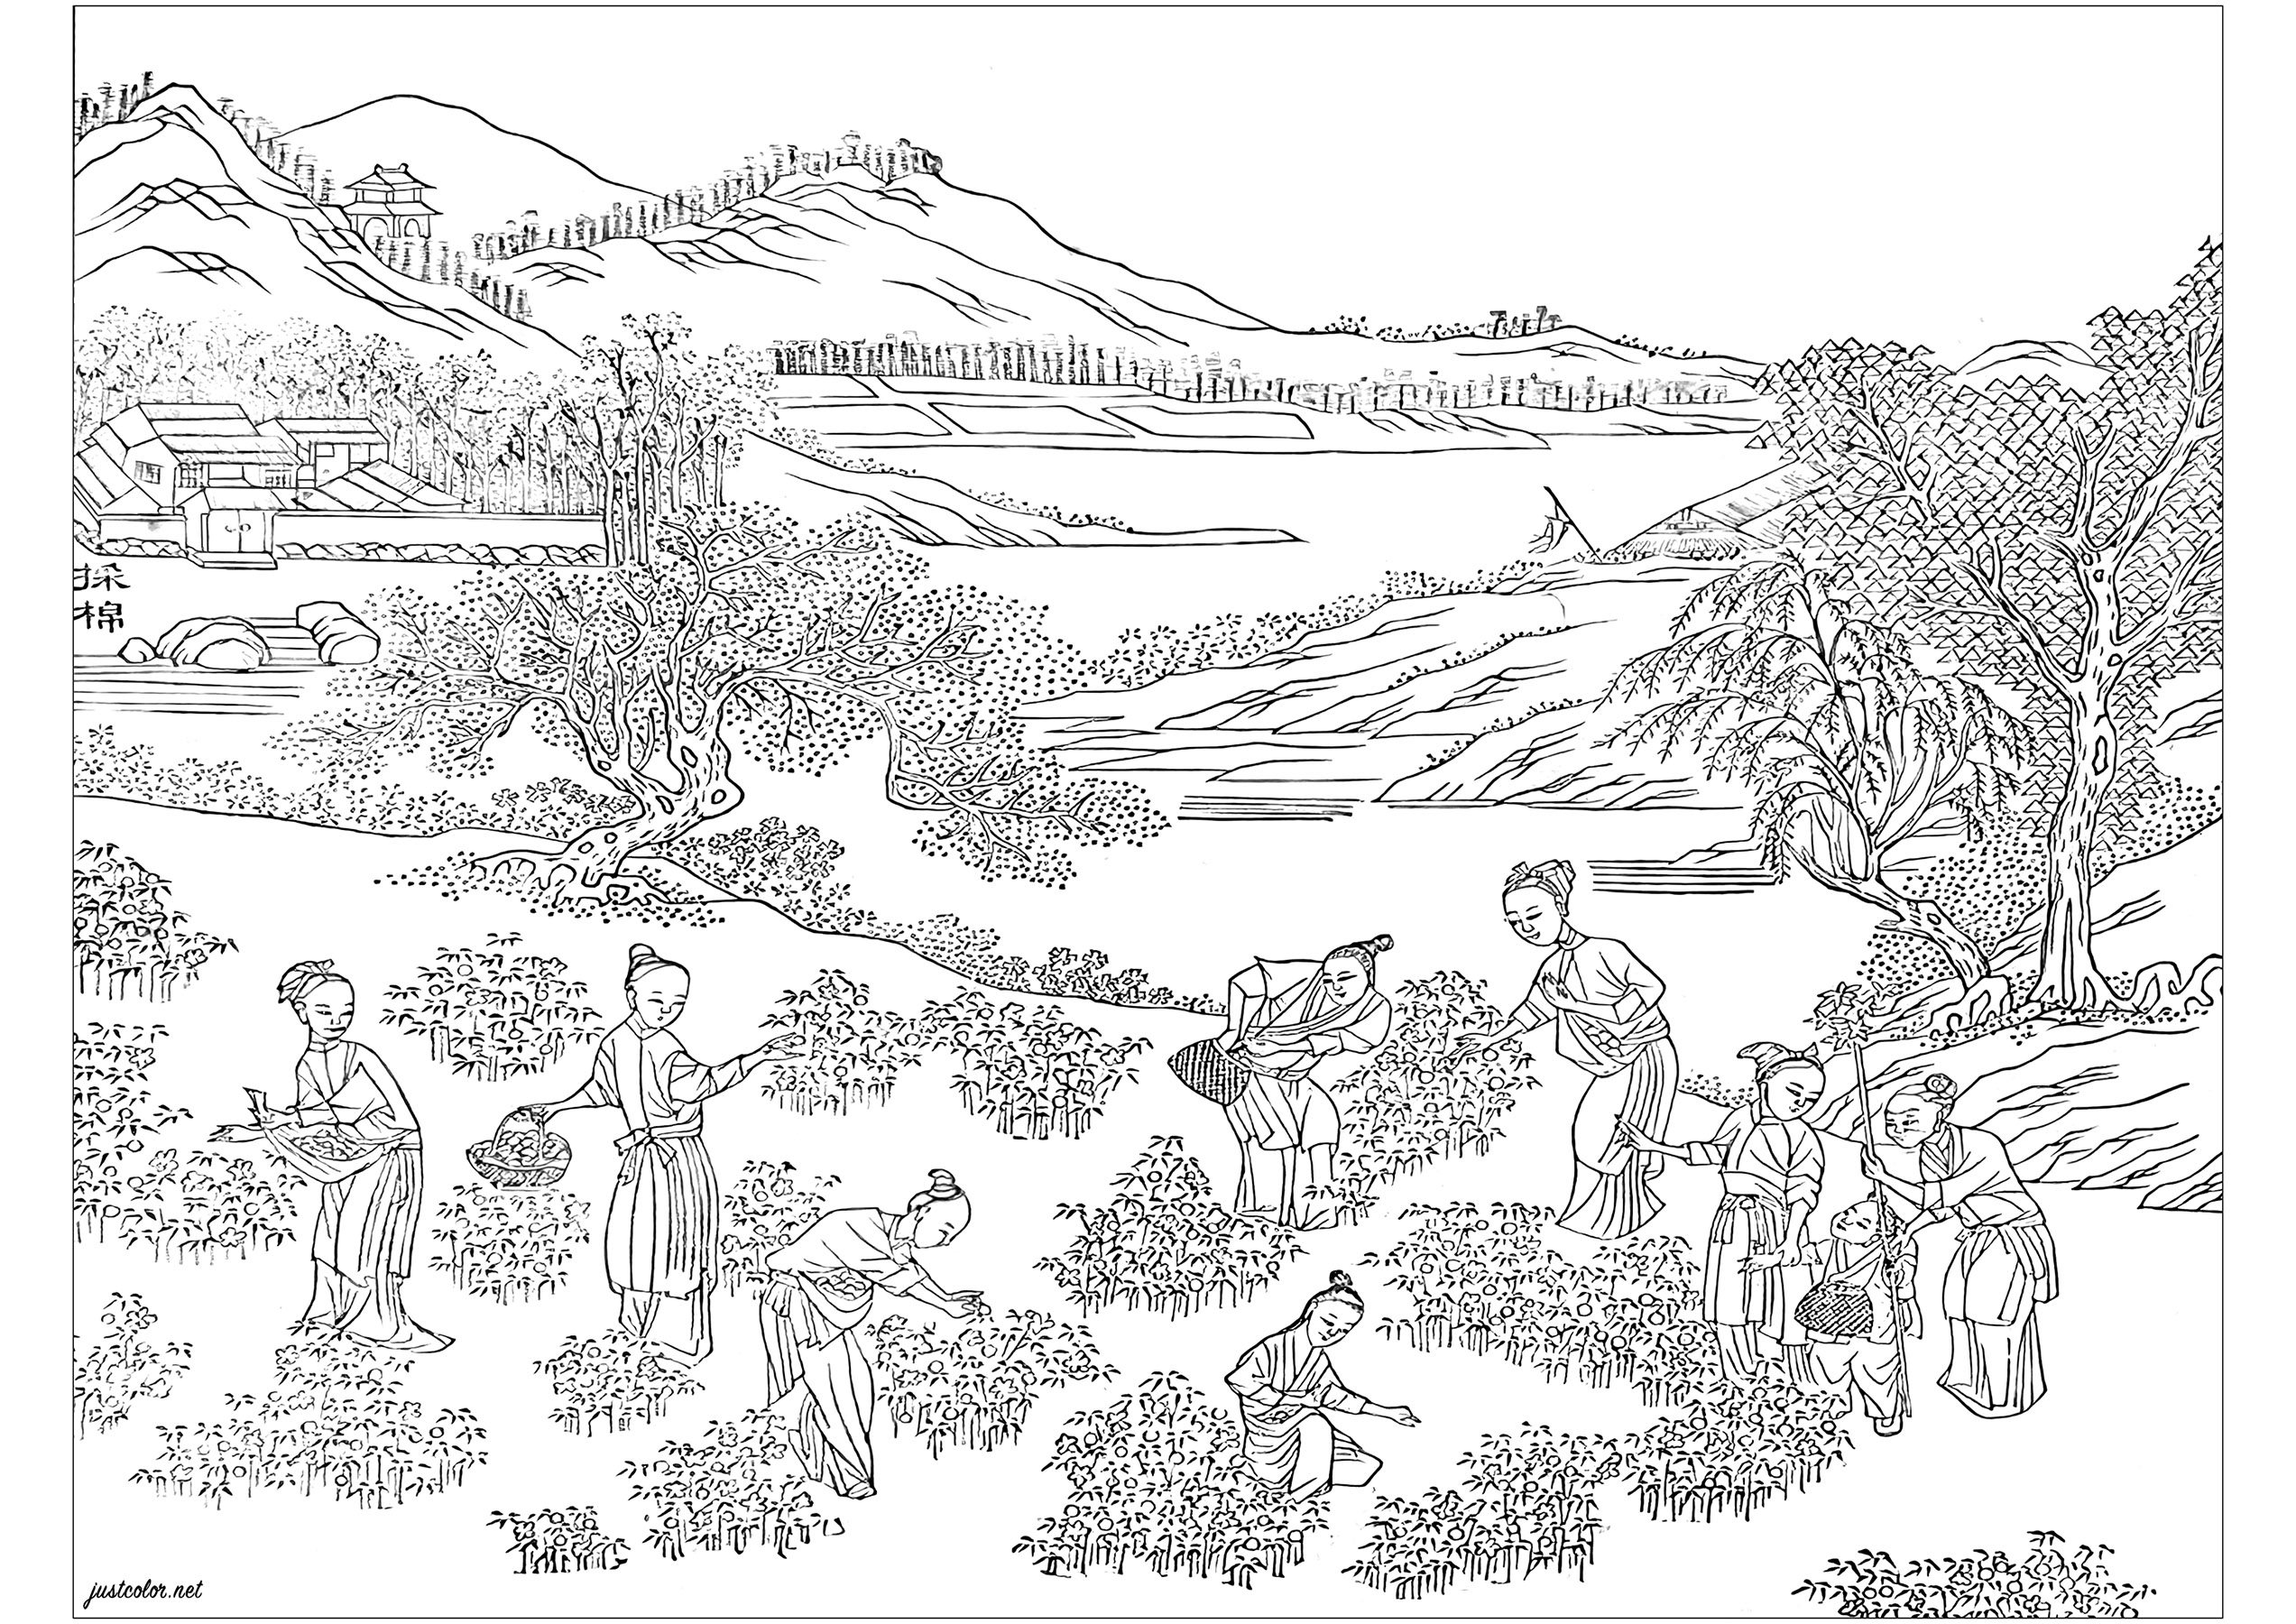 Coloring page created from a drawing page of the printed album 'Pictures Illustrating Cotton Production' (1765). This album was produced to promote the latest technology for cotton cultivation and textile production in the eighteenth-century China. This Book is part of the Chester Beatty Library, in Dublin, Ireland